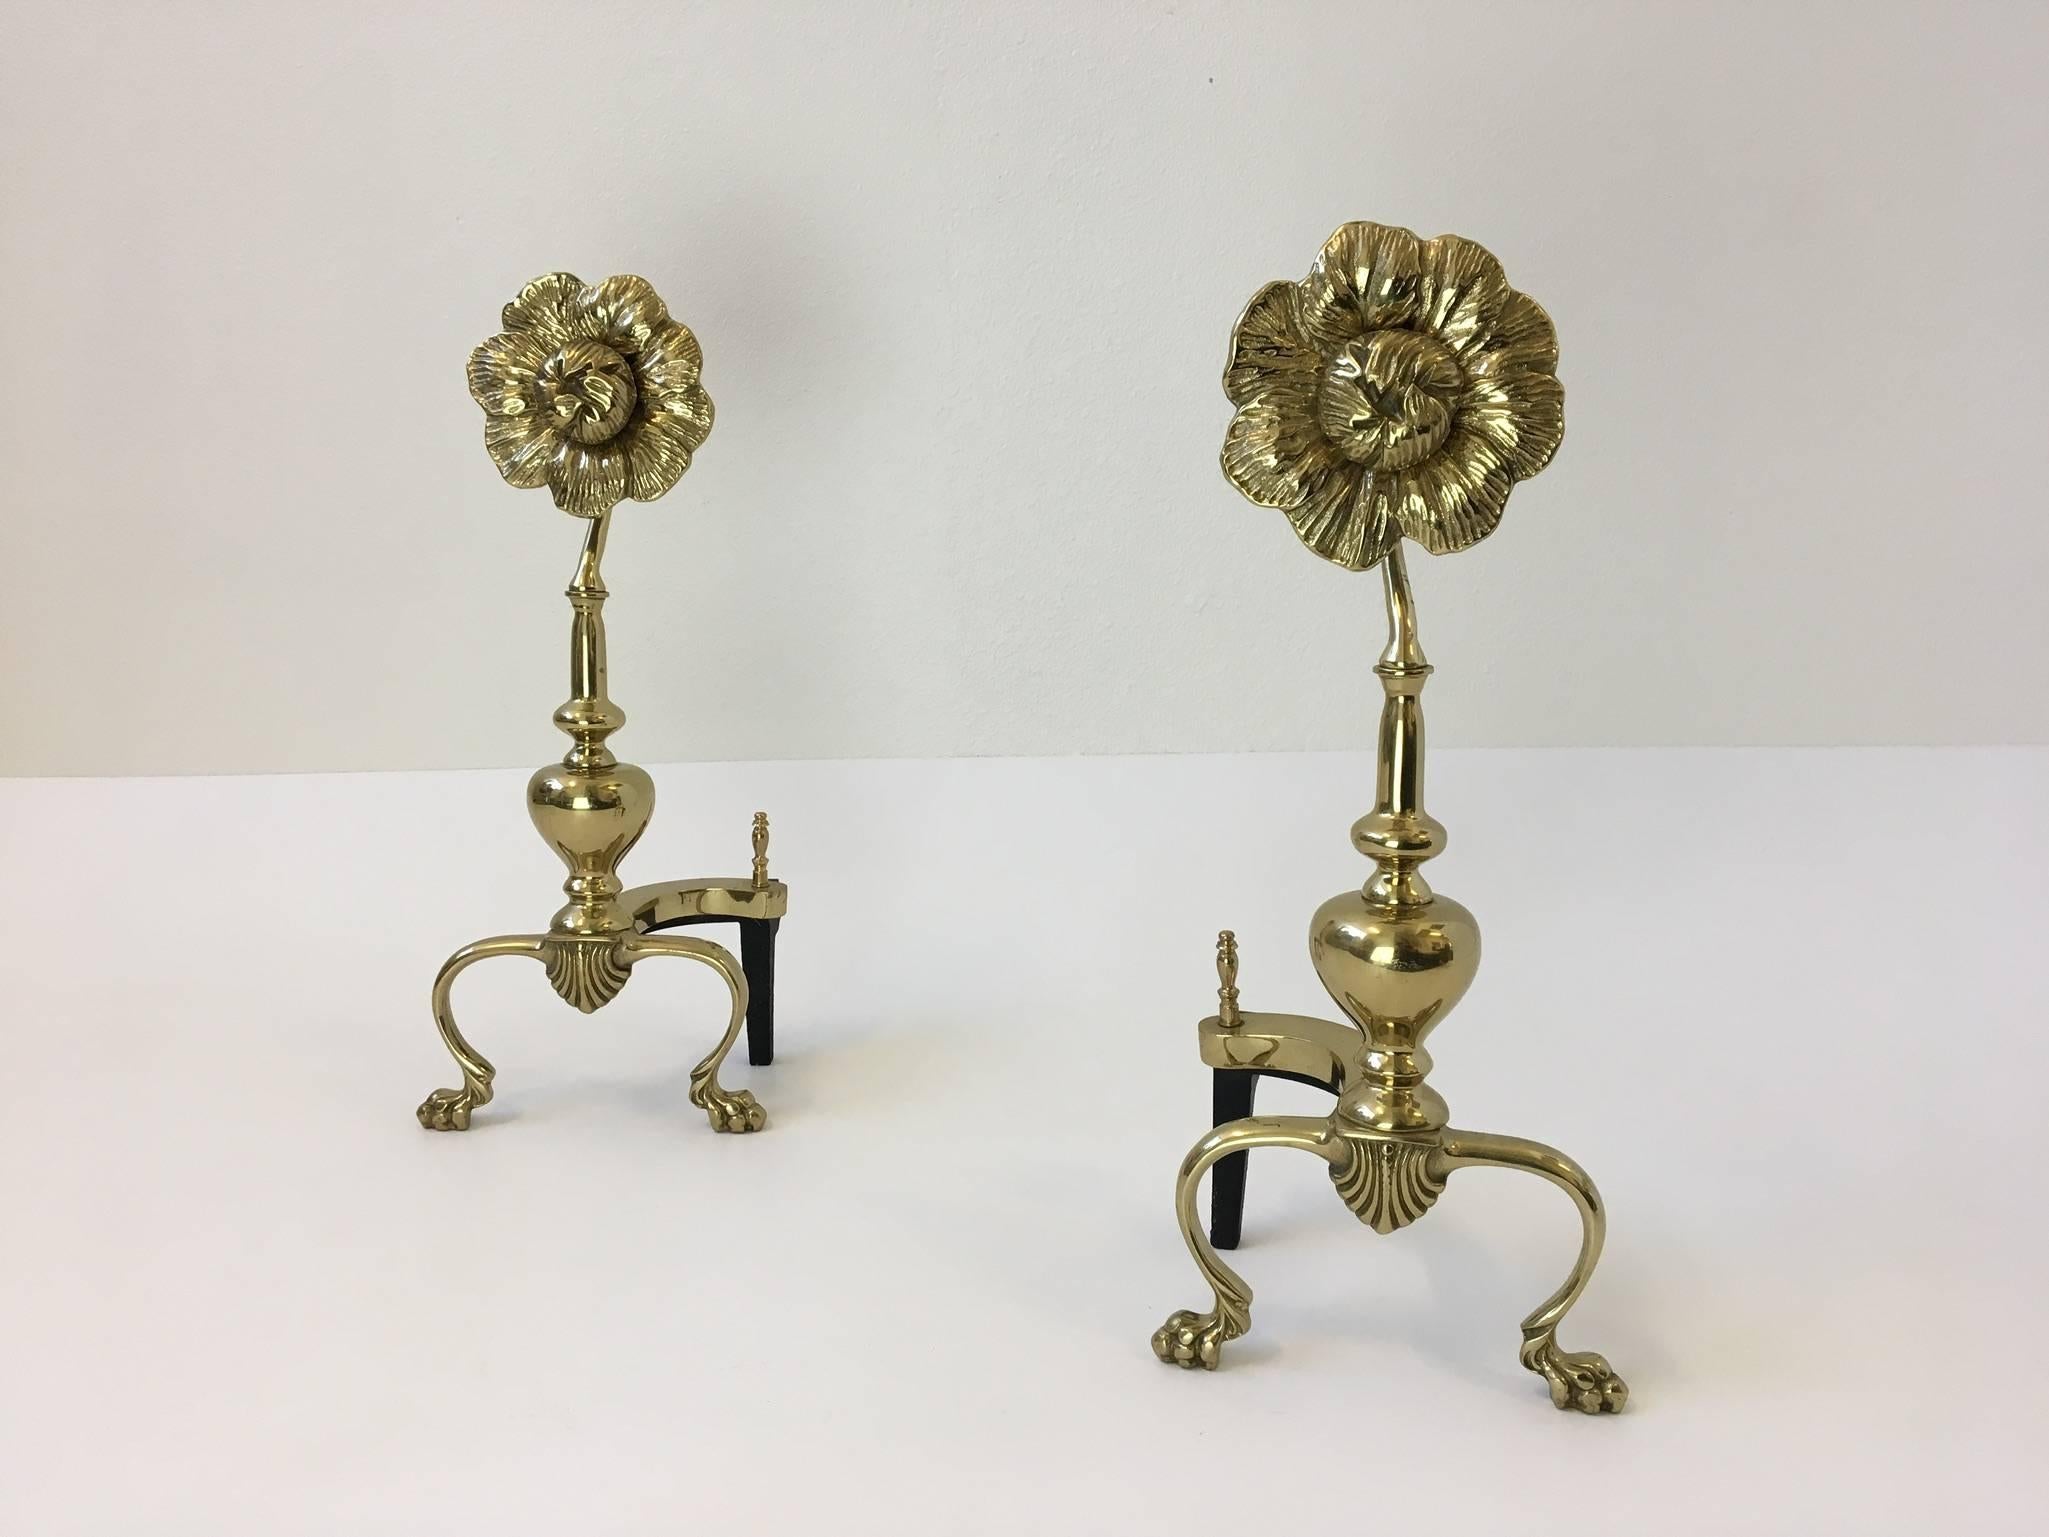 Hollywood Regency Pair of Polished Brass Flower Andirons